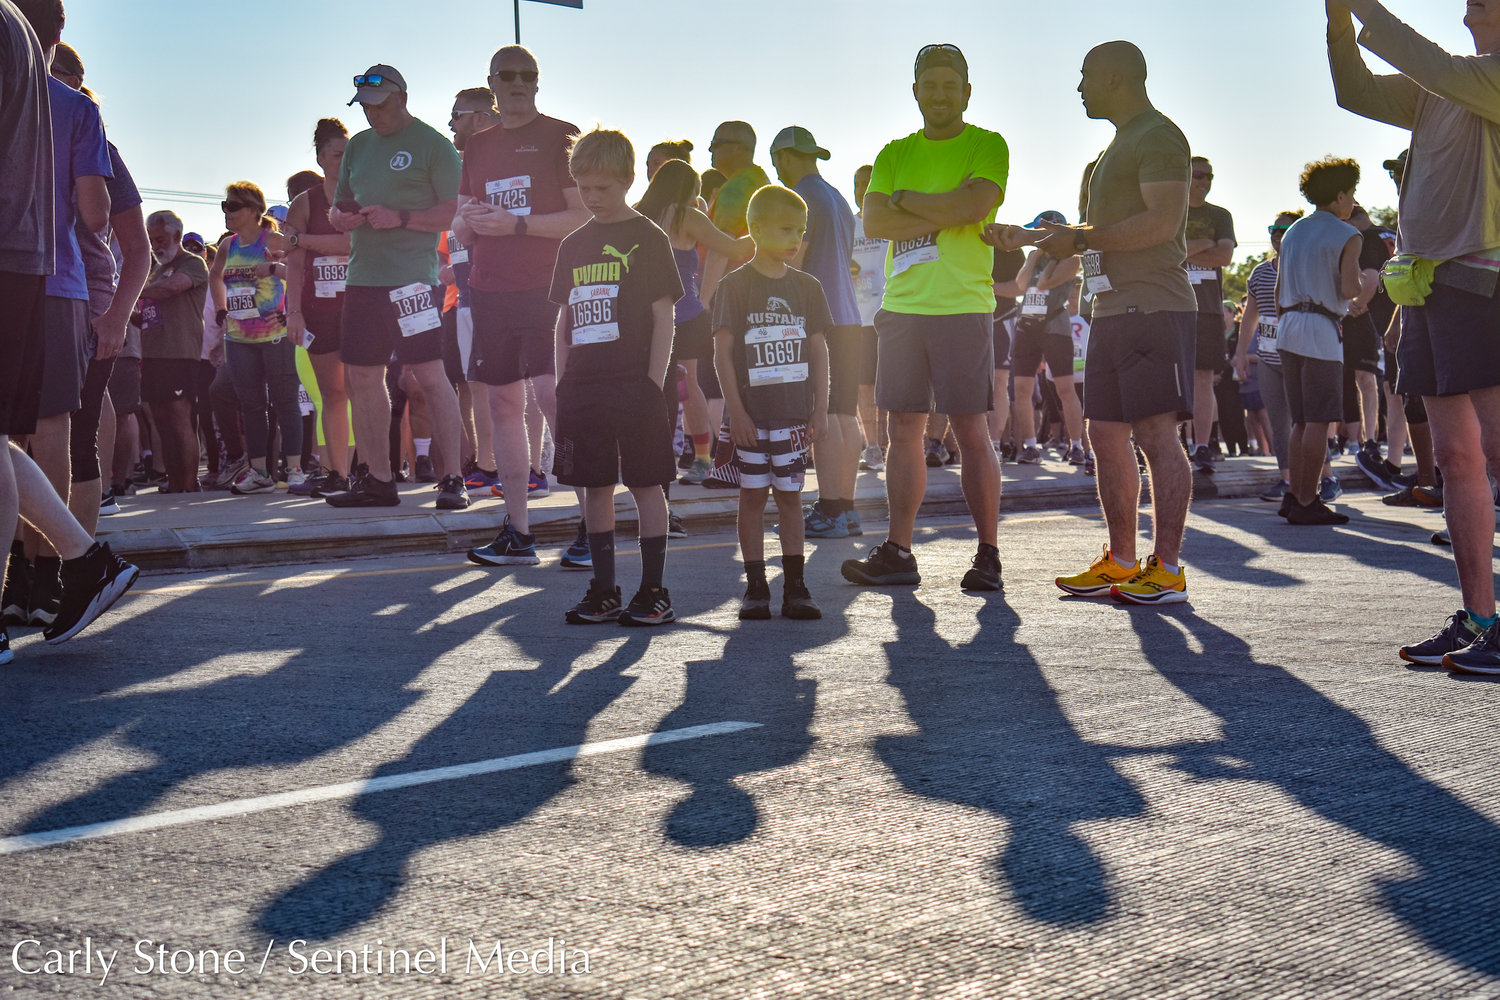 Pictured from left to right, young racers Daniel and Ellis Dziuban cast an impactful shadow next to Billy Gibson and Jeremy Dziuban as they wait to participate in the 2022 Boilermaker 5K.